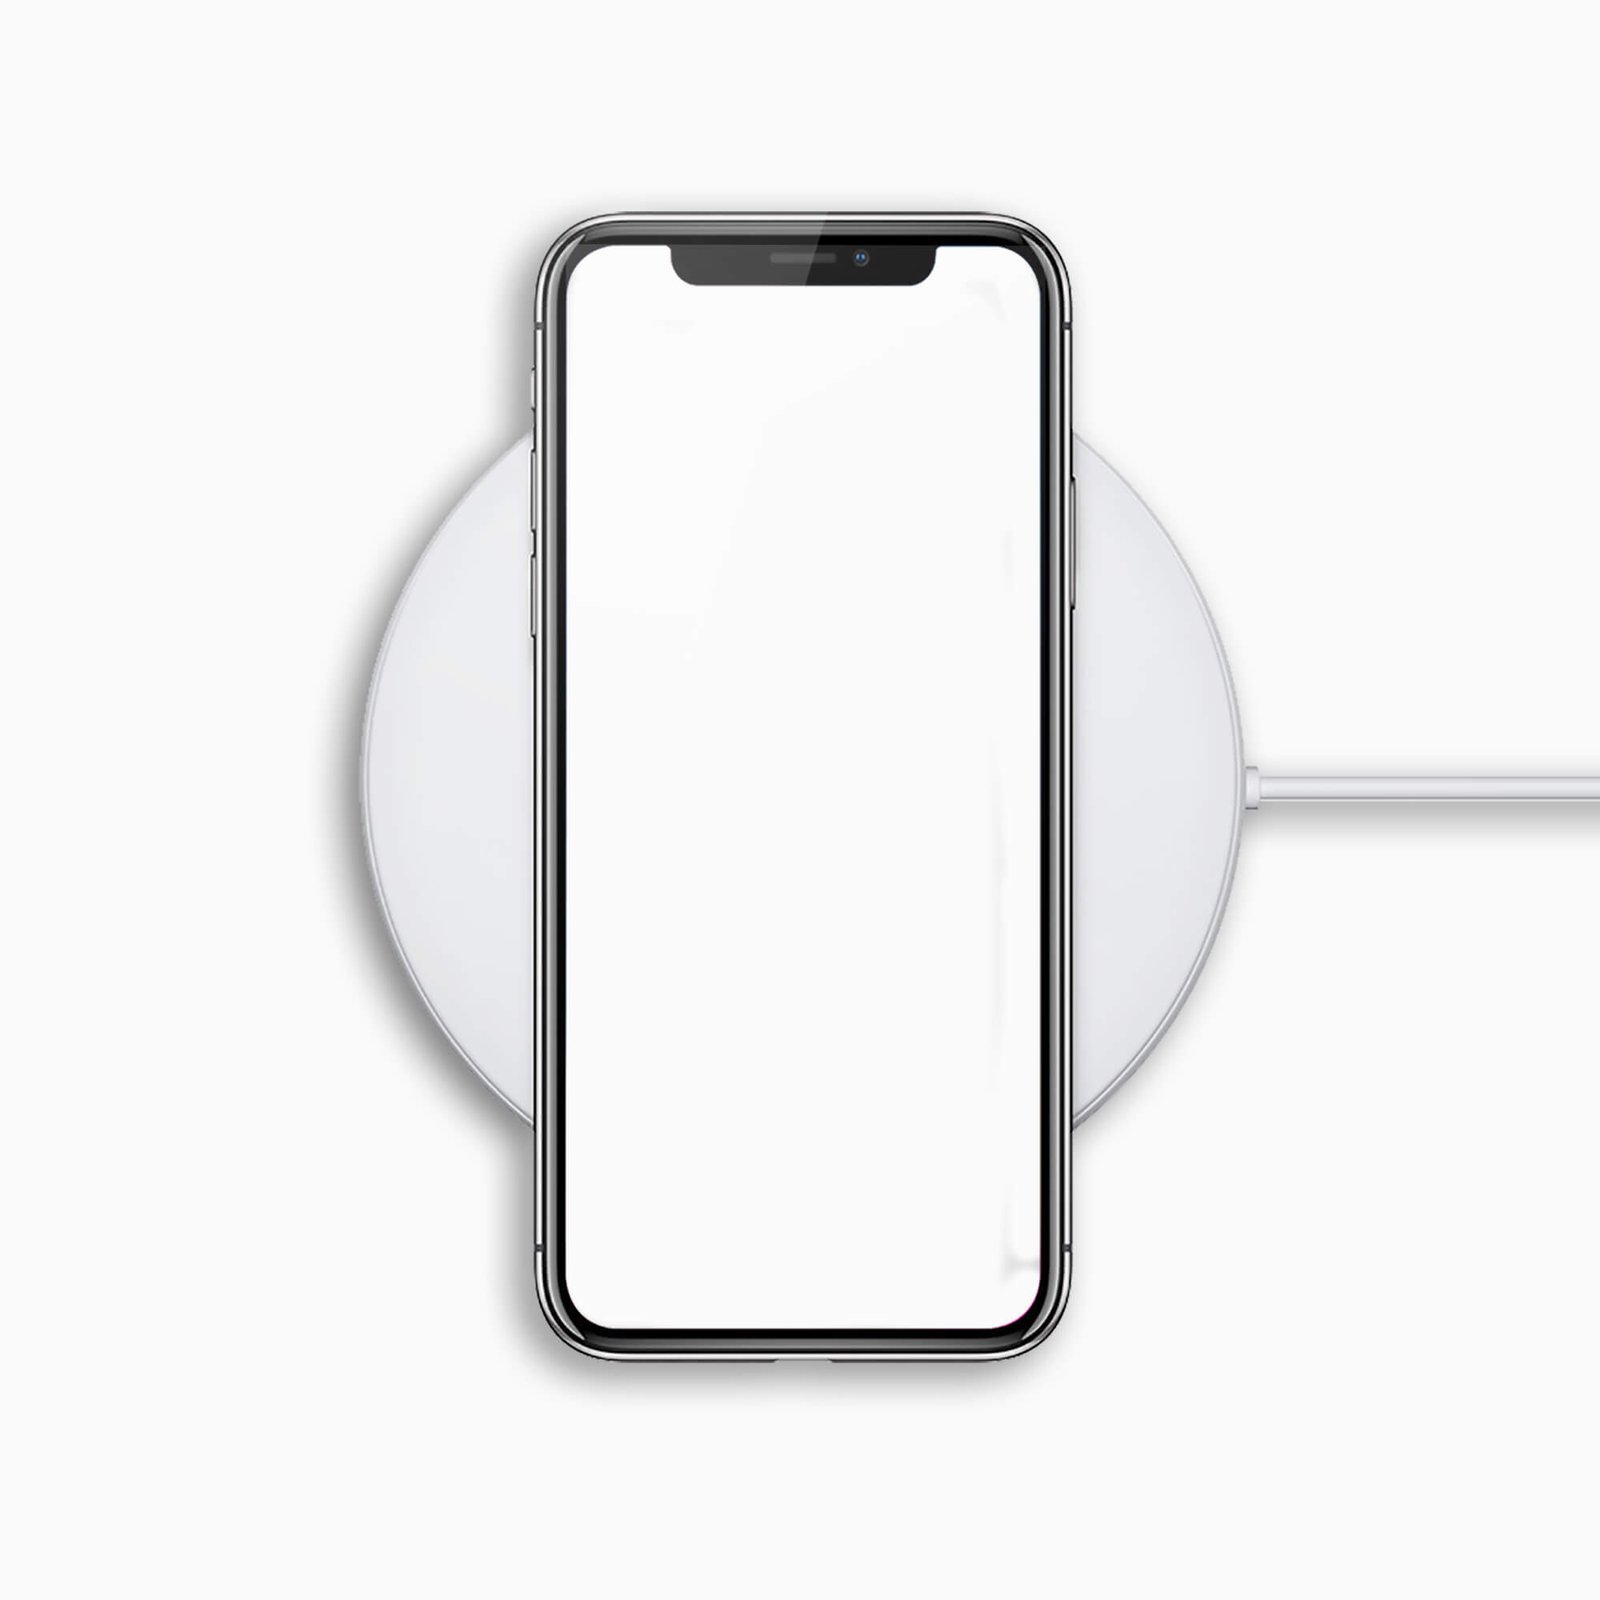 Blank Free Wireless Charger Mockup PSD Template